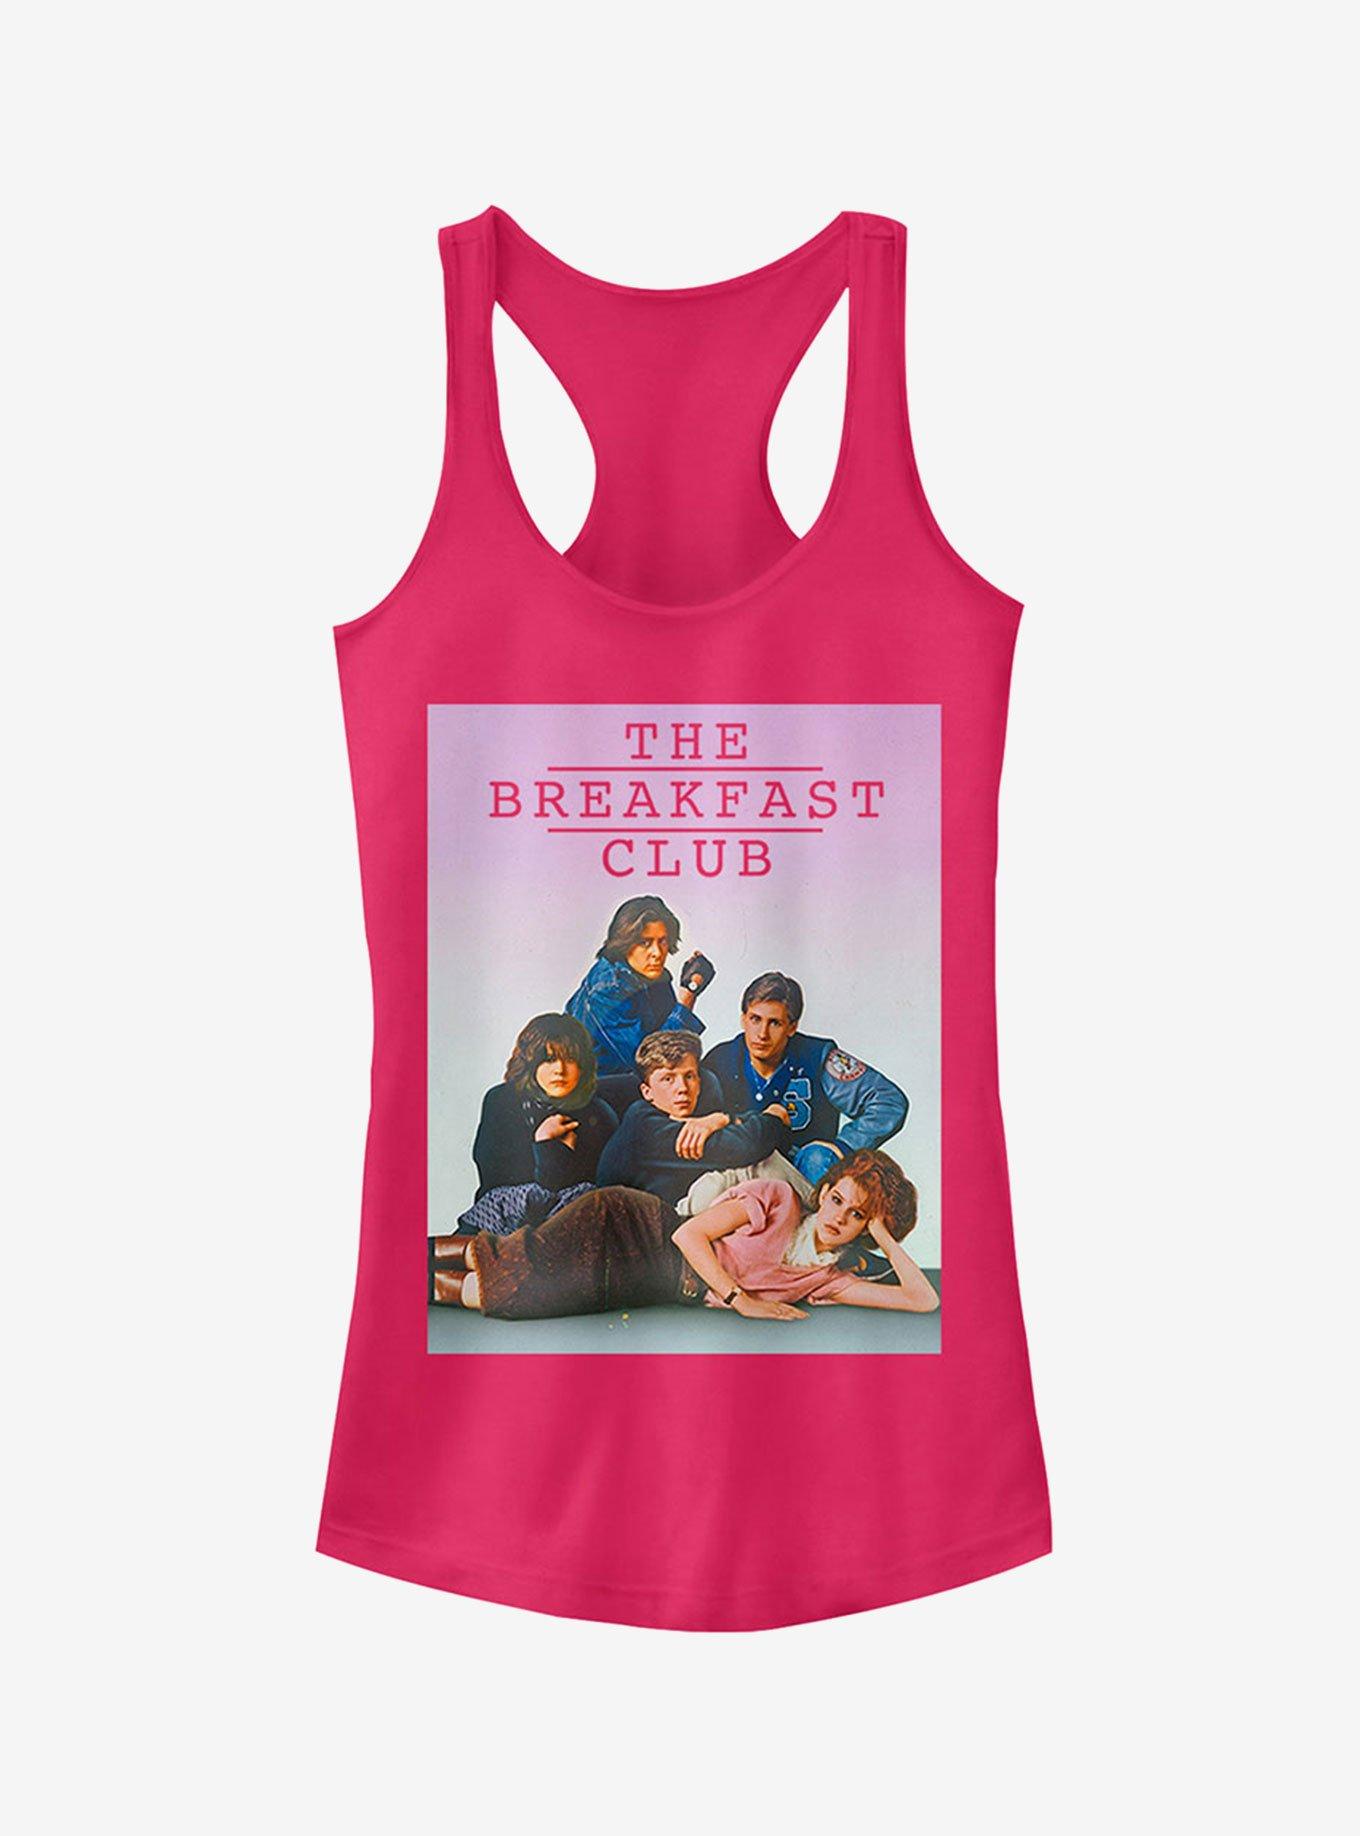 The Breakfast Club Iconic Detention Pose Girls Tank Top